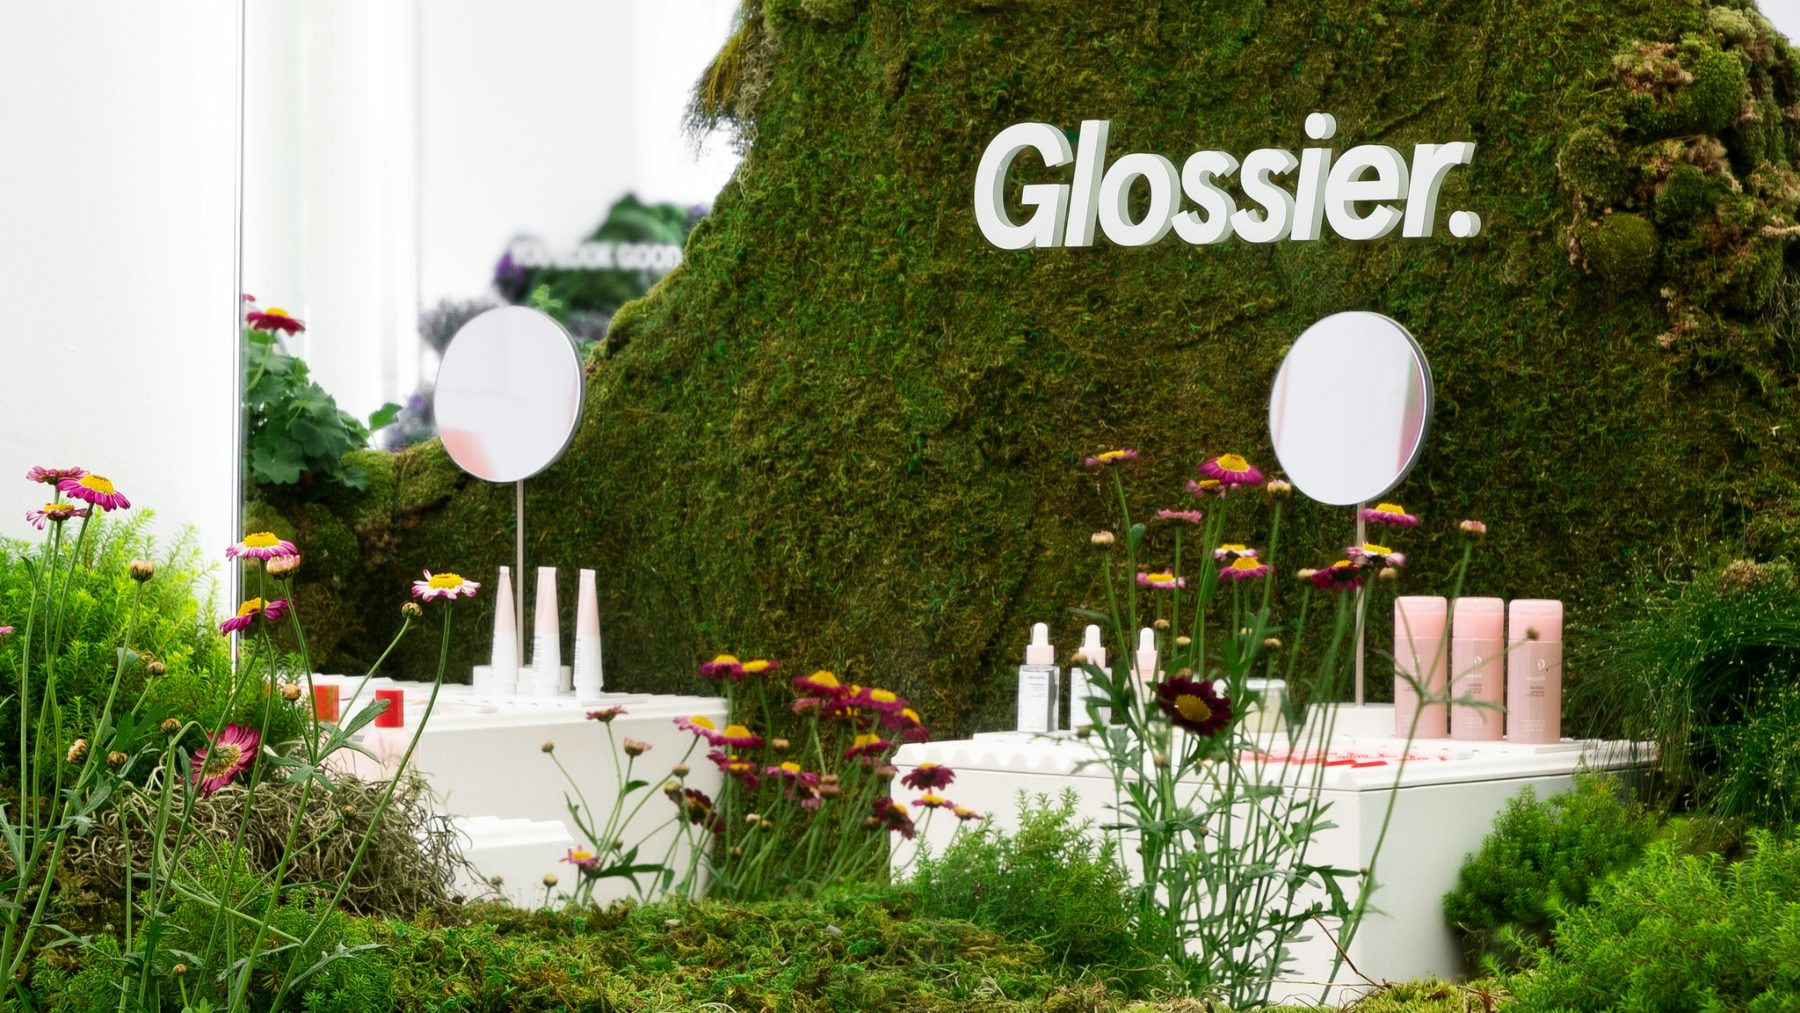 Glossier's Seattle pop-up. The brand will open its first new permanent location in the city. Glossier.